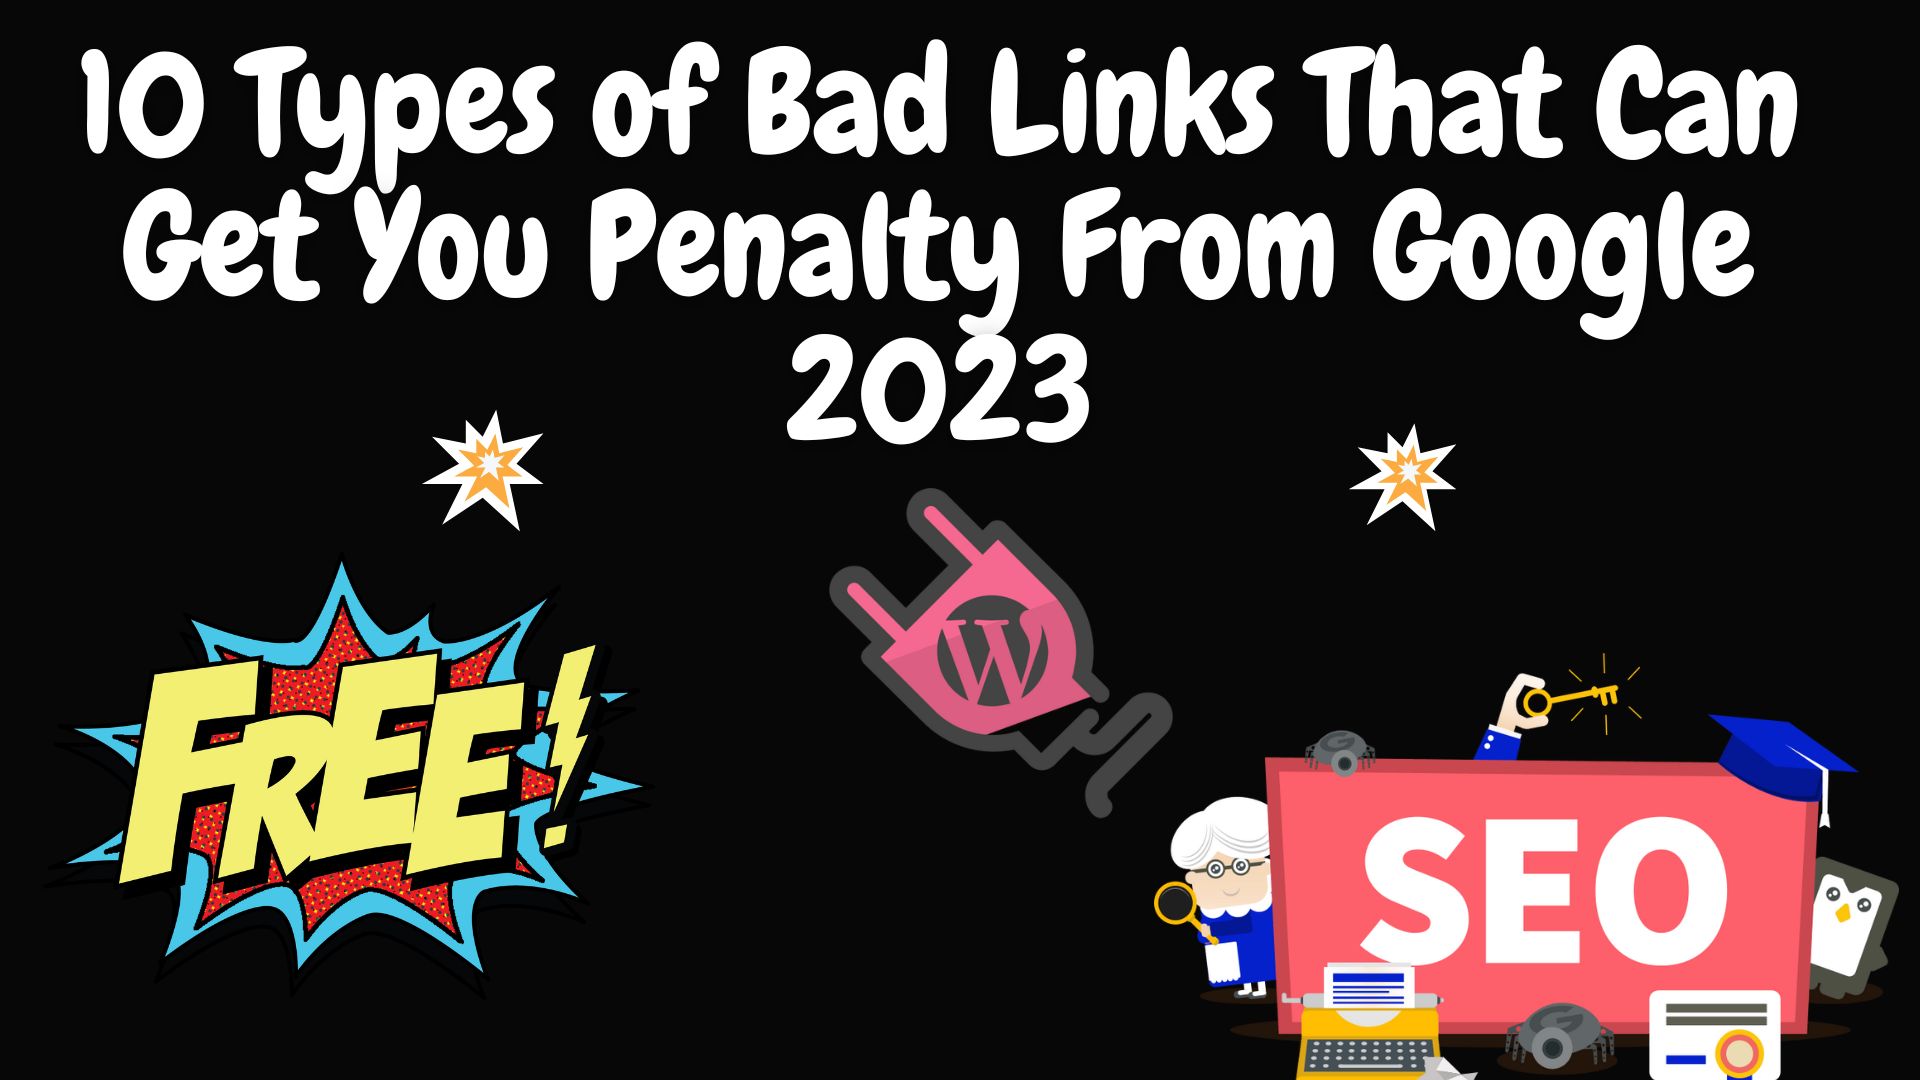 10 Types Of Bad Links That Can Get You Penalty From Google 2023